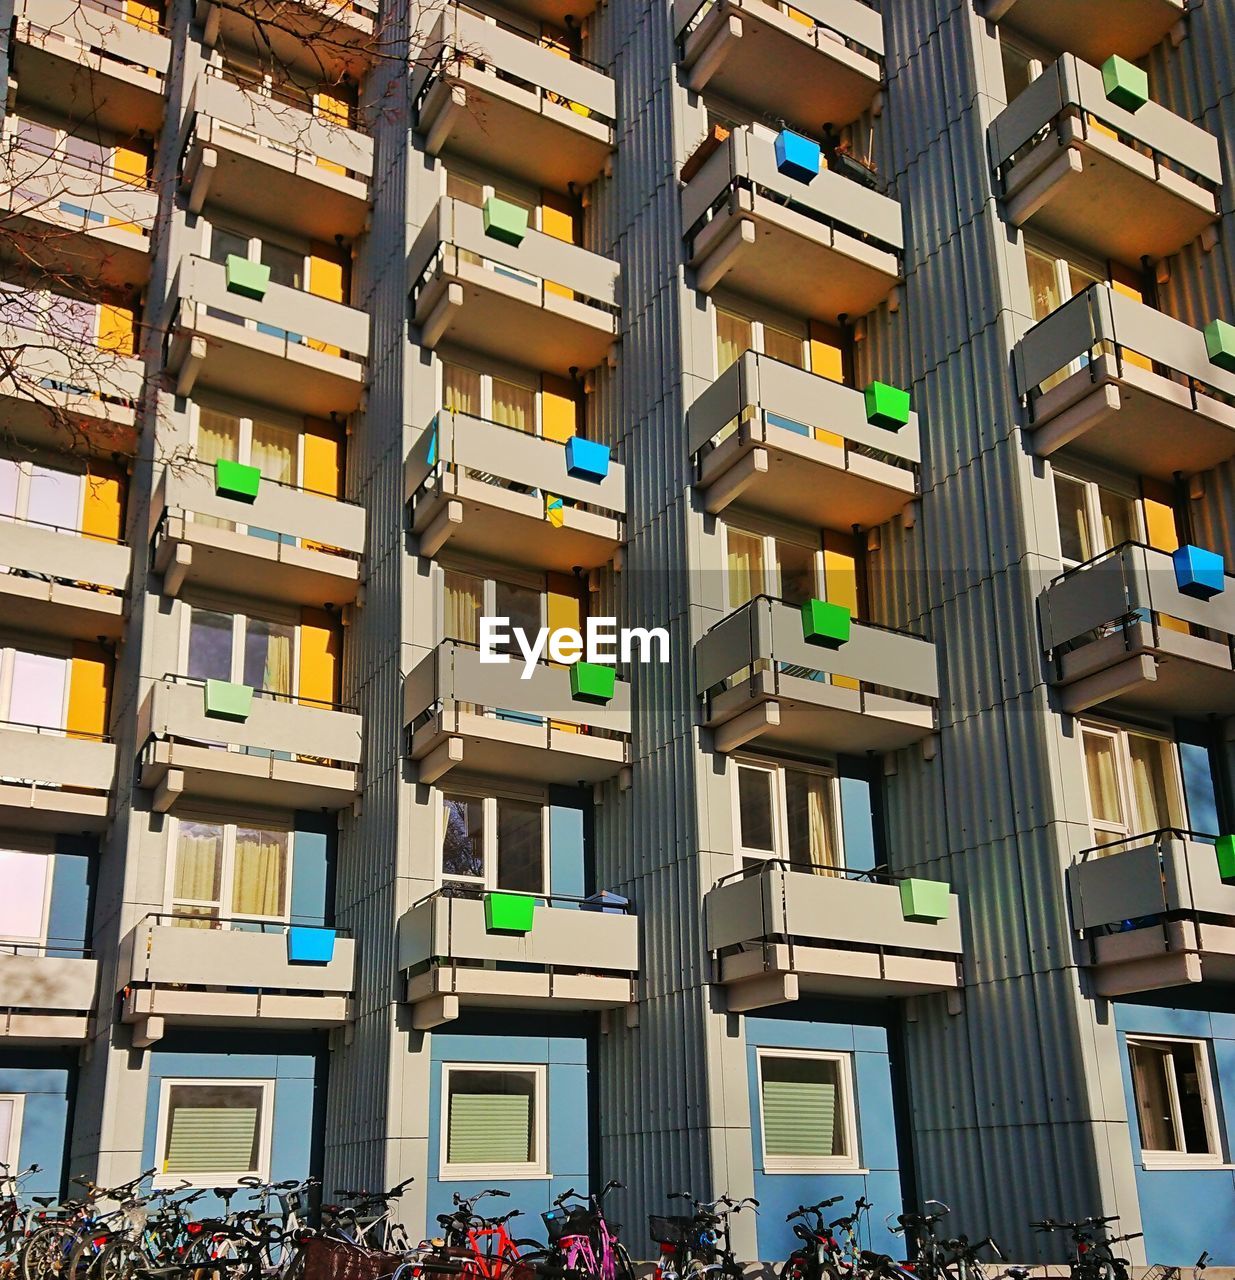 architecture, building exterior, built structure, building, neighbourhood, city, residential area, urban area, crowd, facade, tower block, group of people, condominium, residential district, window, day, outdoors, in a row, metropolis, lifestyles, nature, apartment, large group of people, downtown, sunlight, low angle view